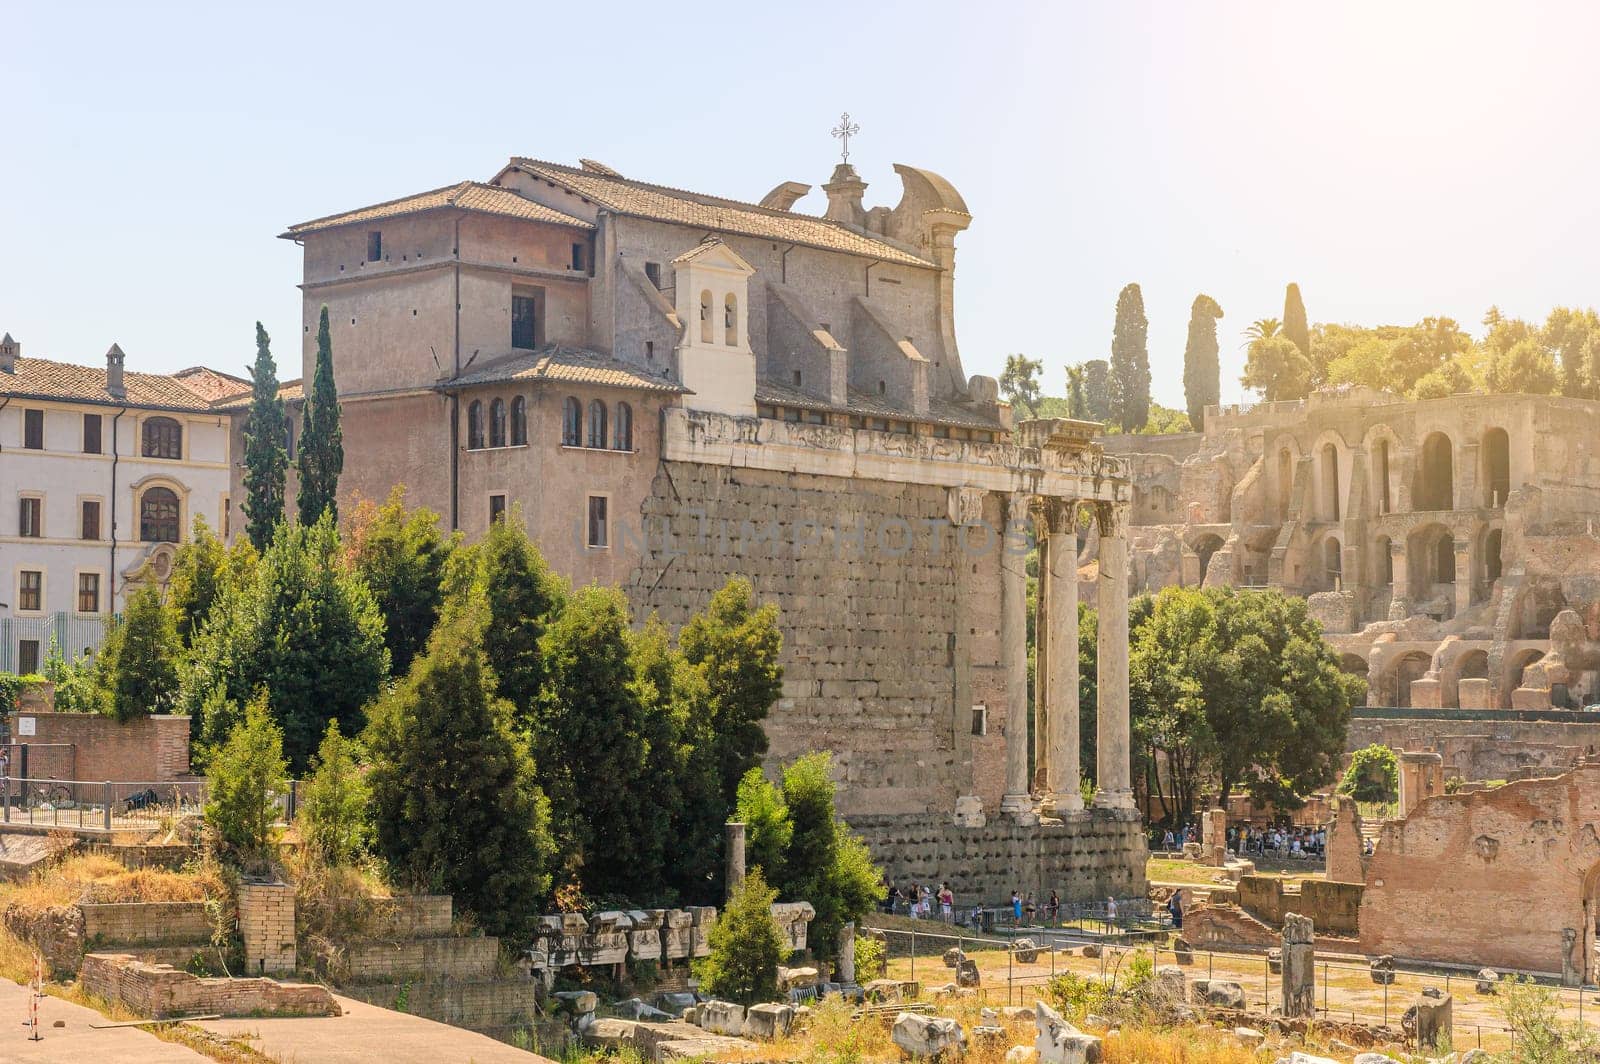 View of the Roman Forum with the Temple of Antoninus and Faustina in the foreground, later converted into a church (San Lorenzo in Miranda), with the Palatine Hill in the background